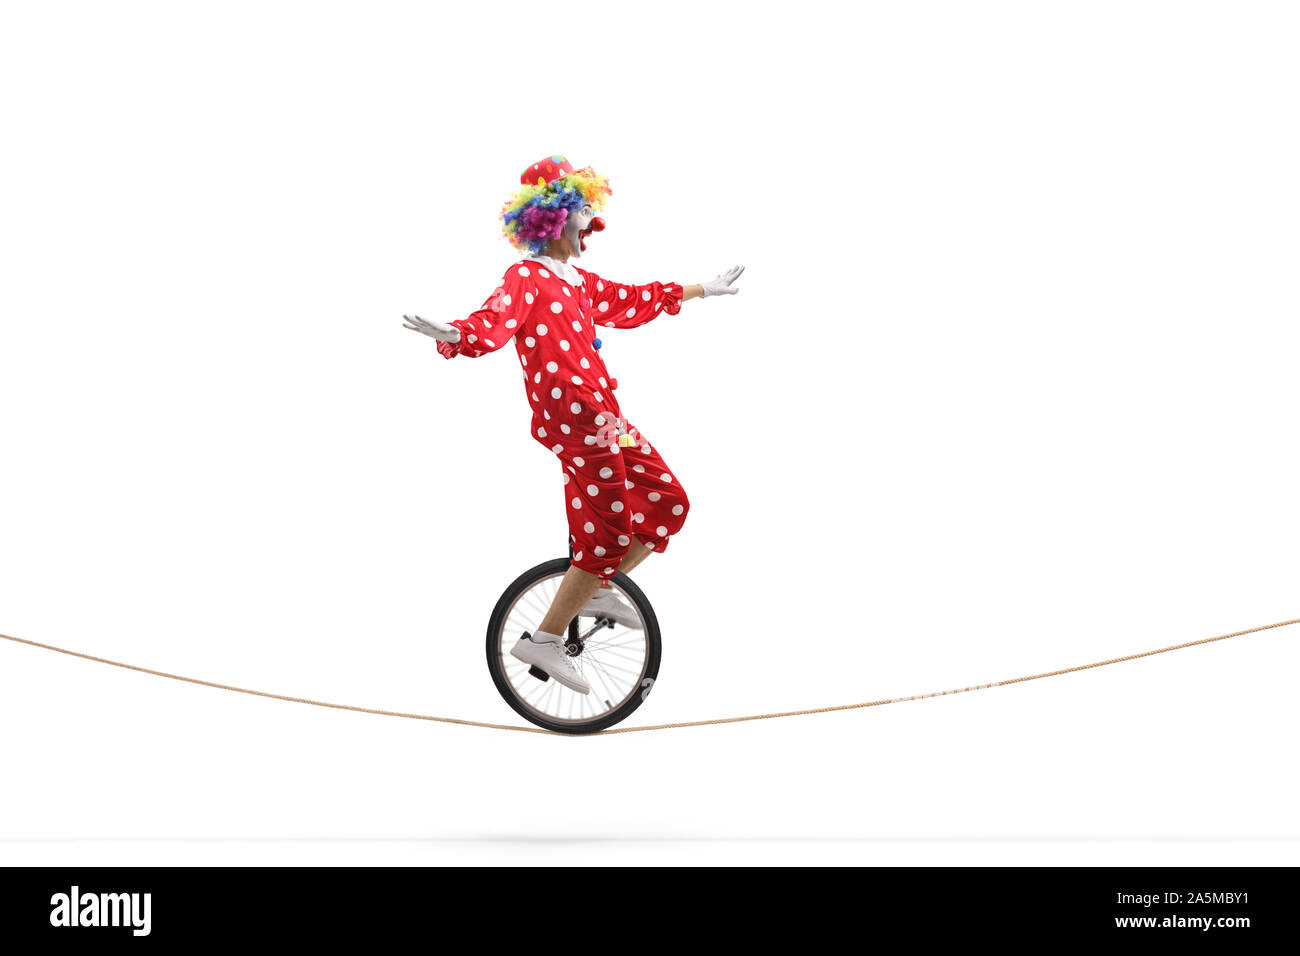 Full length profile shot of a scared clown riding a unicycle on a rope isolated on white background Stock Photo